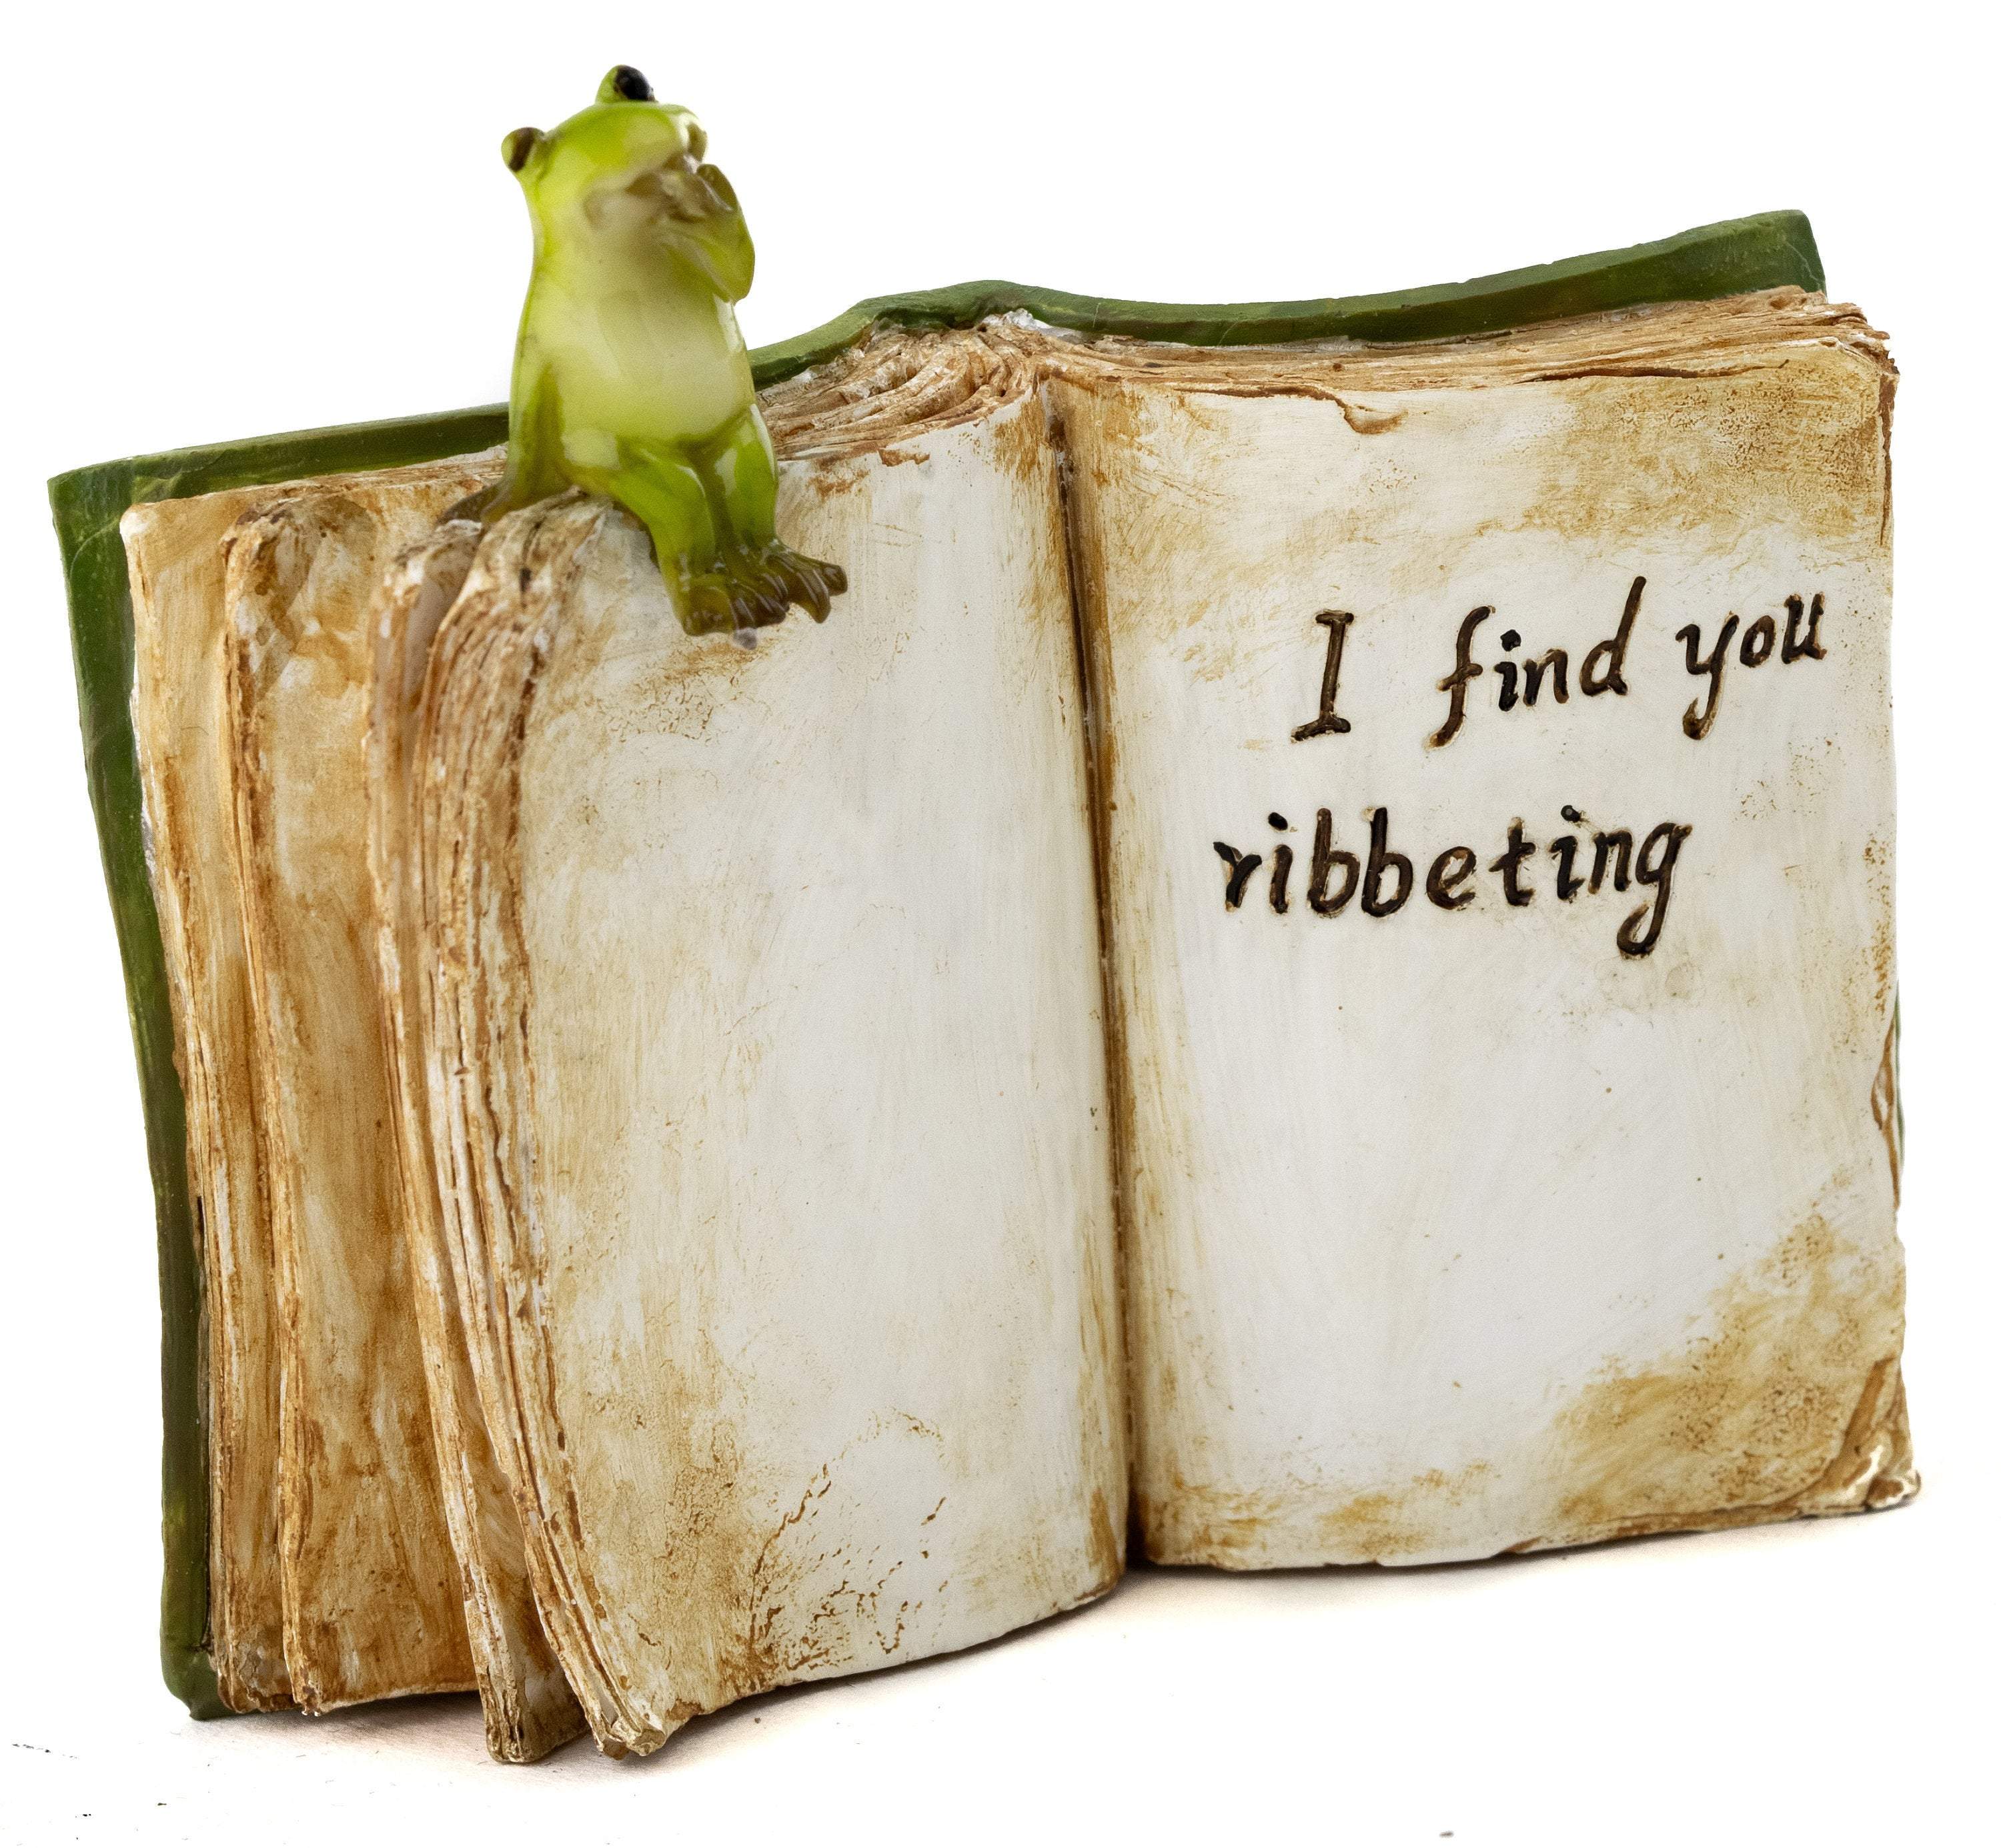 I Find You Ribbeting Book with Frog, Fairy Garden, Mini Frog, Miniature Frog, Frog Reading - Mini Fairy Garden World